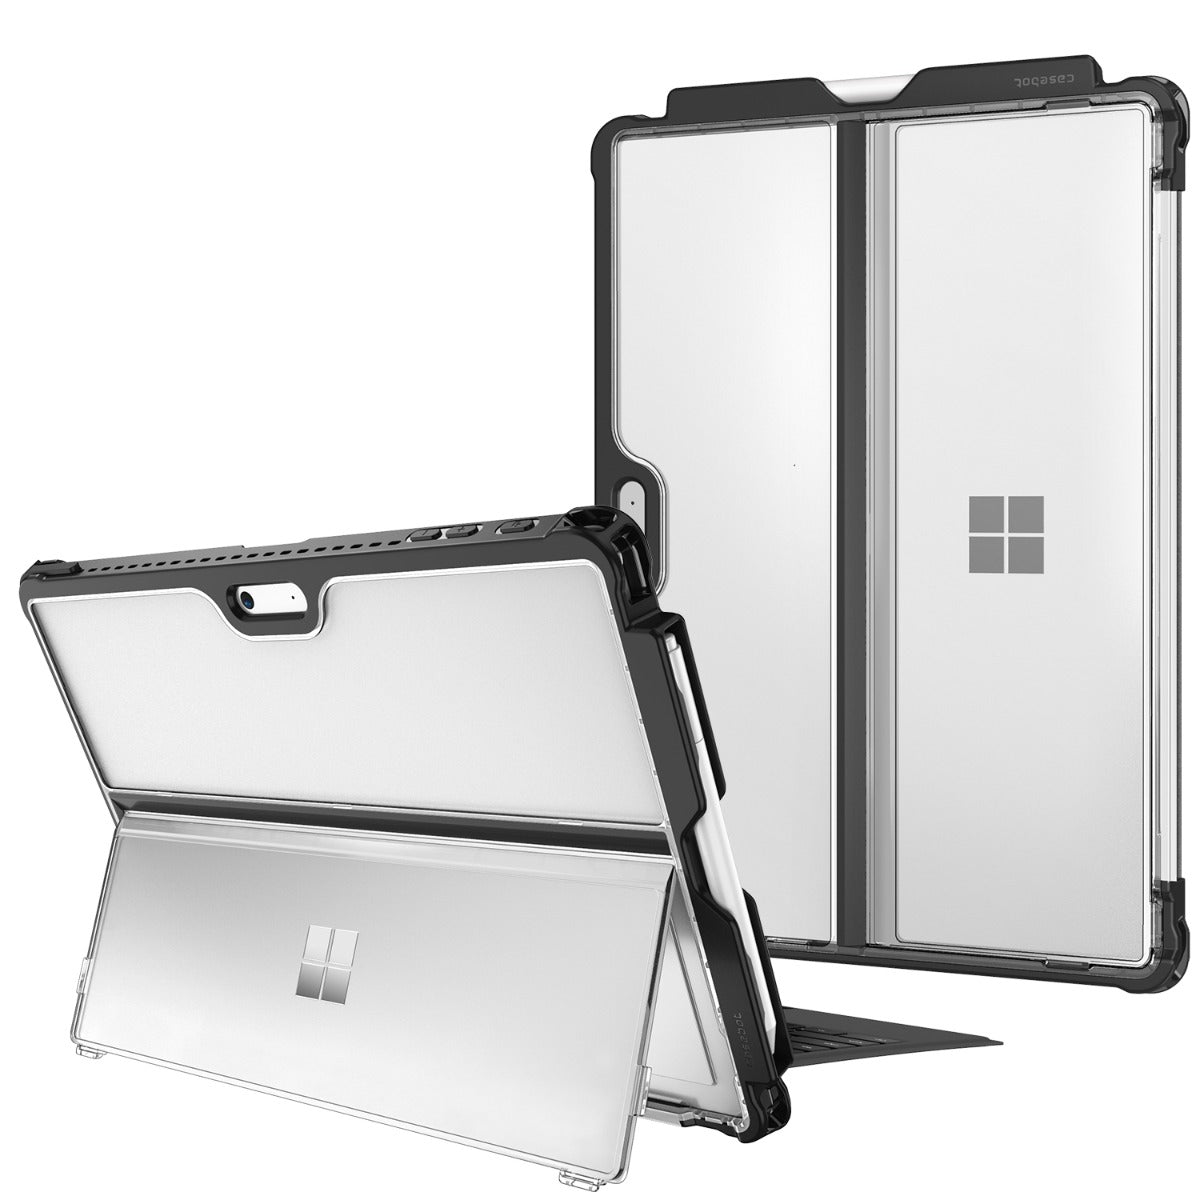 ProCase Microsoft Surface Pro 7 / Pro 6 / Pro 5 /Pro 2017 / Pro 4 / Pro LTE Case, Slim Light Smart Cover Stand Case with Built-in Surface Pen Holder